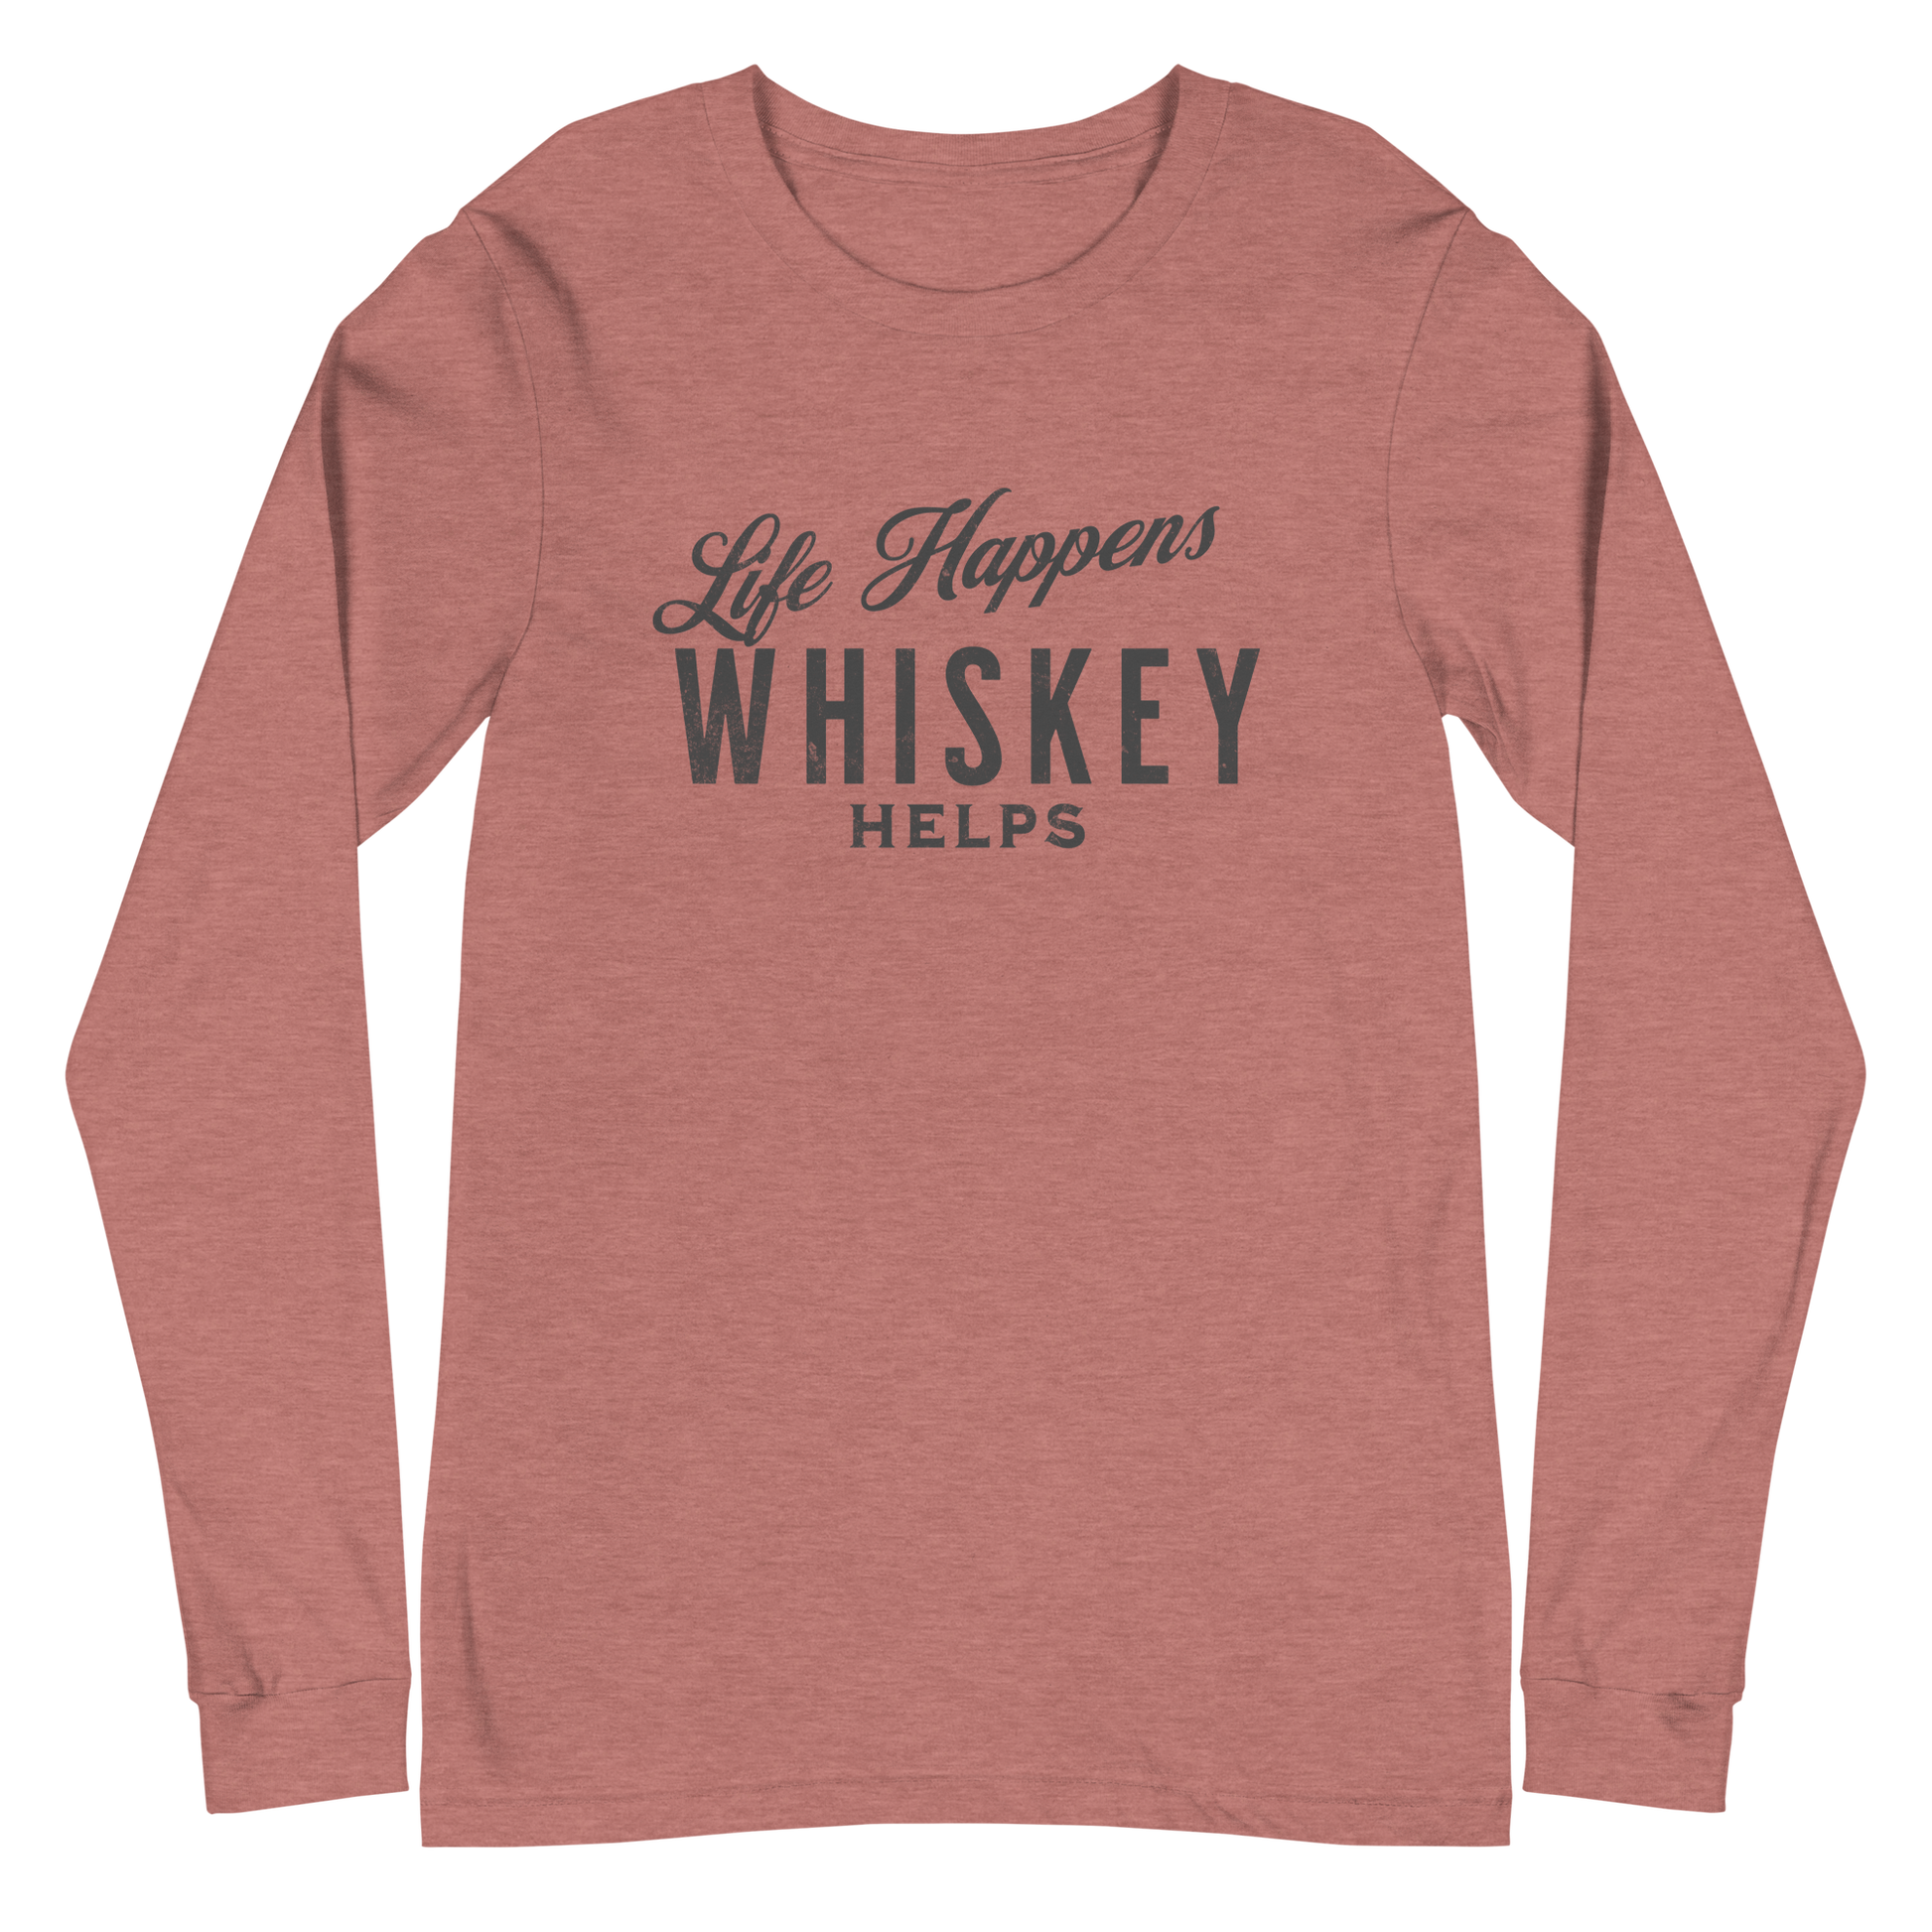 Life Happens Whiskey Helps Tee - Funny Drinking Long Sleeve DRINKING,LONG SLEEVE TEE,MENS,New,UNISEX,WHISKEY,WOMENS Dayzzed Apparel